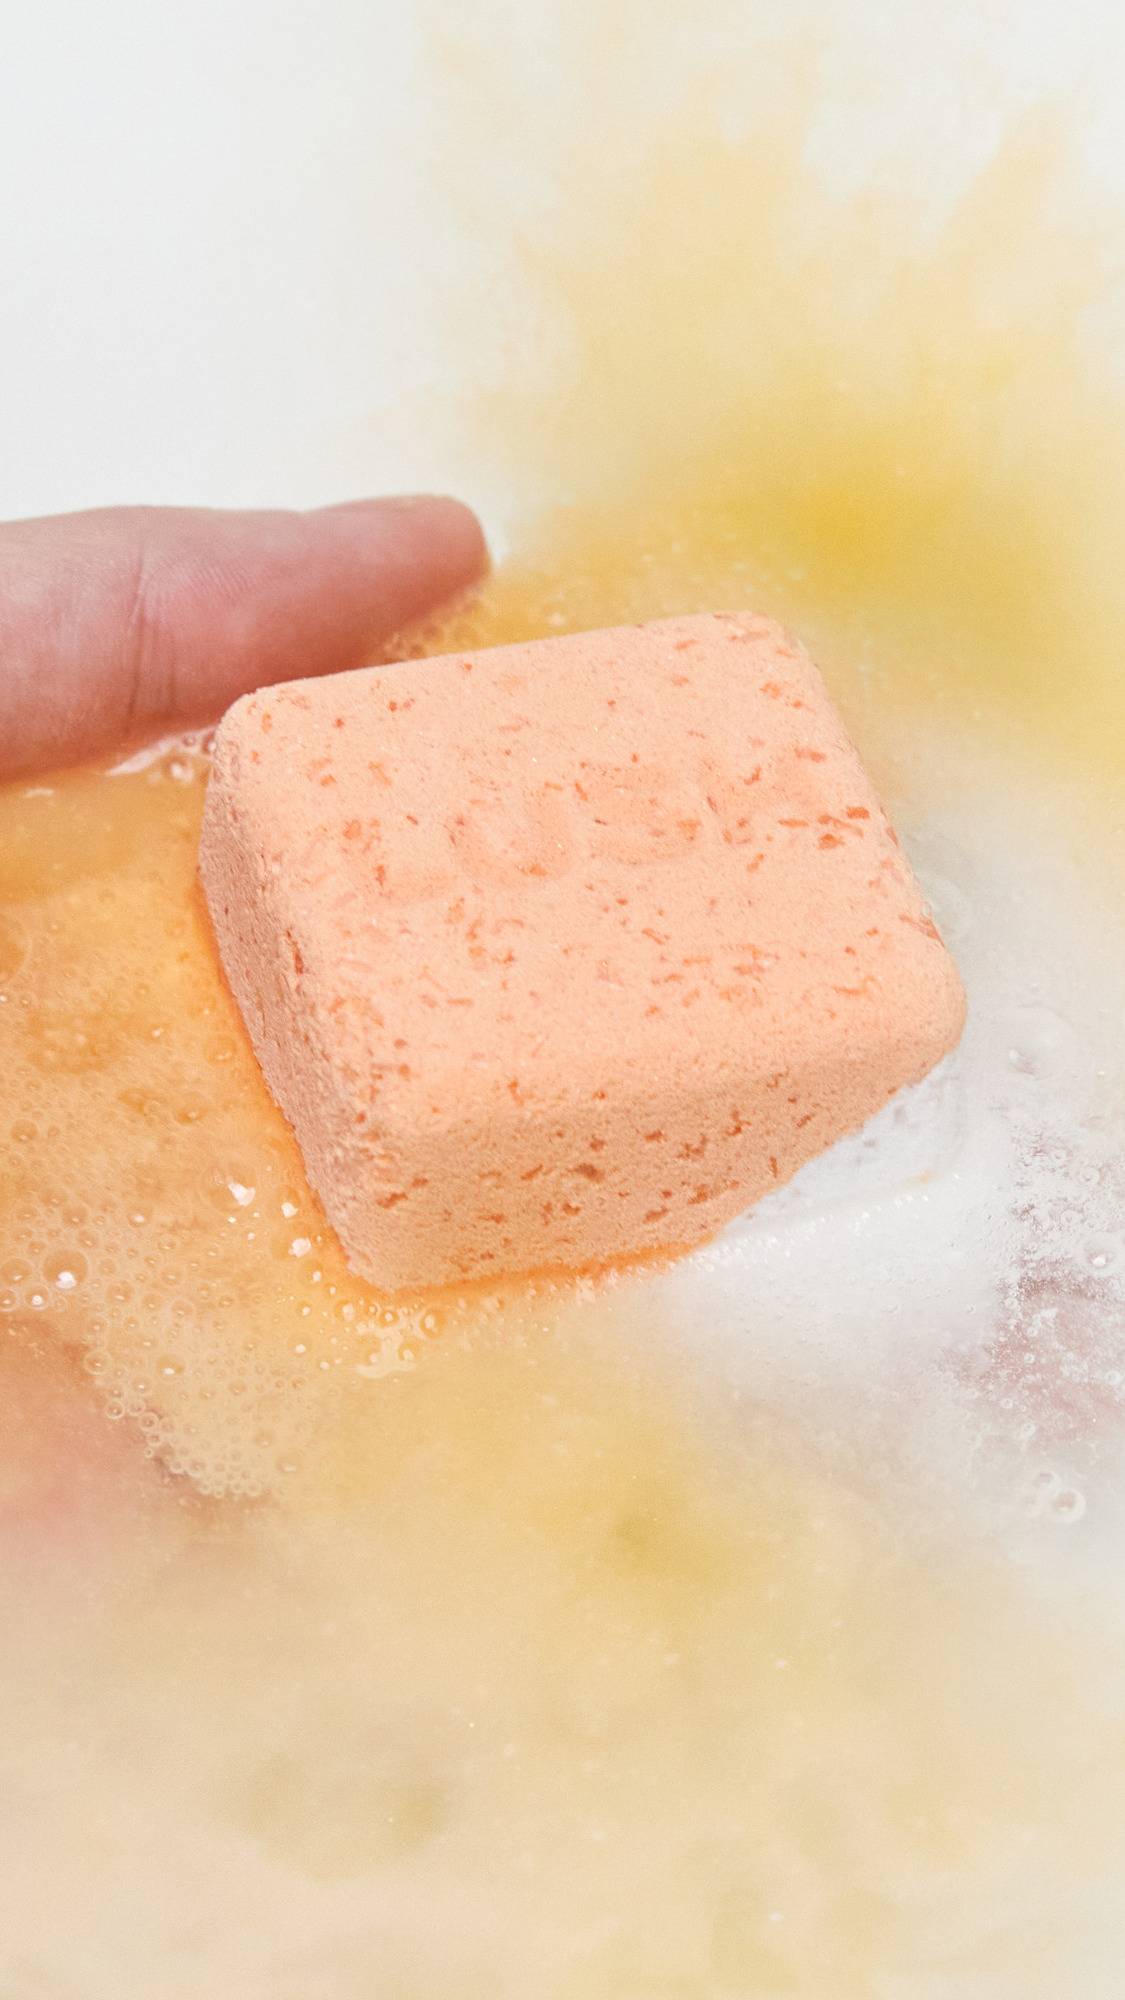 The Cold Water Soother bath bomb is being gently placed into the bath water by hand as it starts dissolving and gives off subtle, peachy foam. 